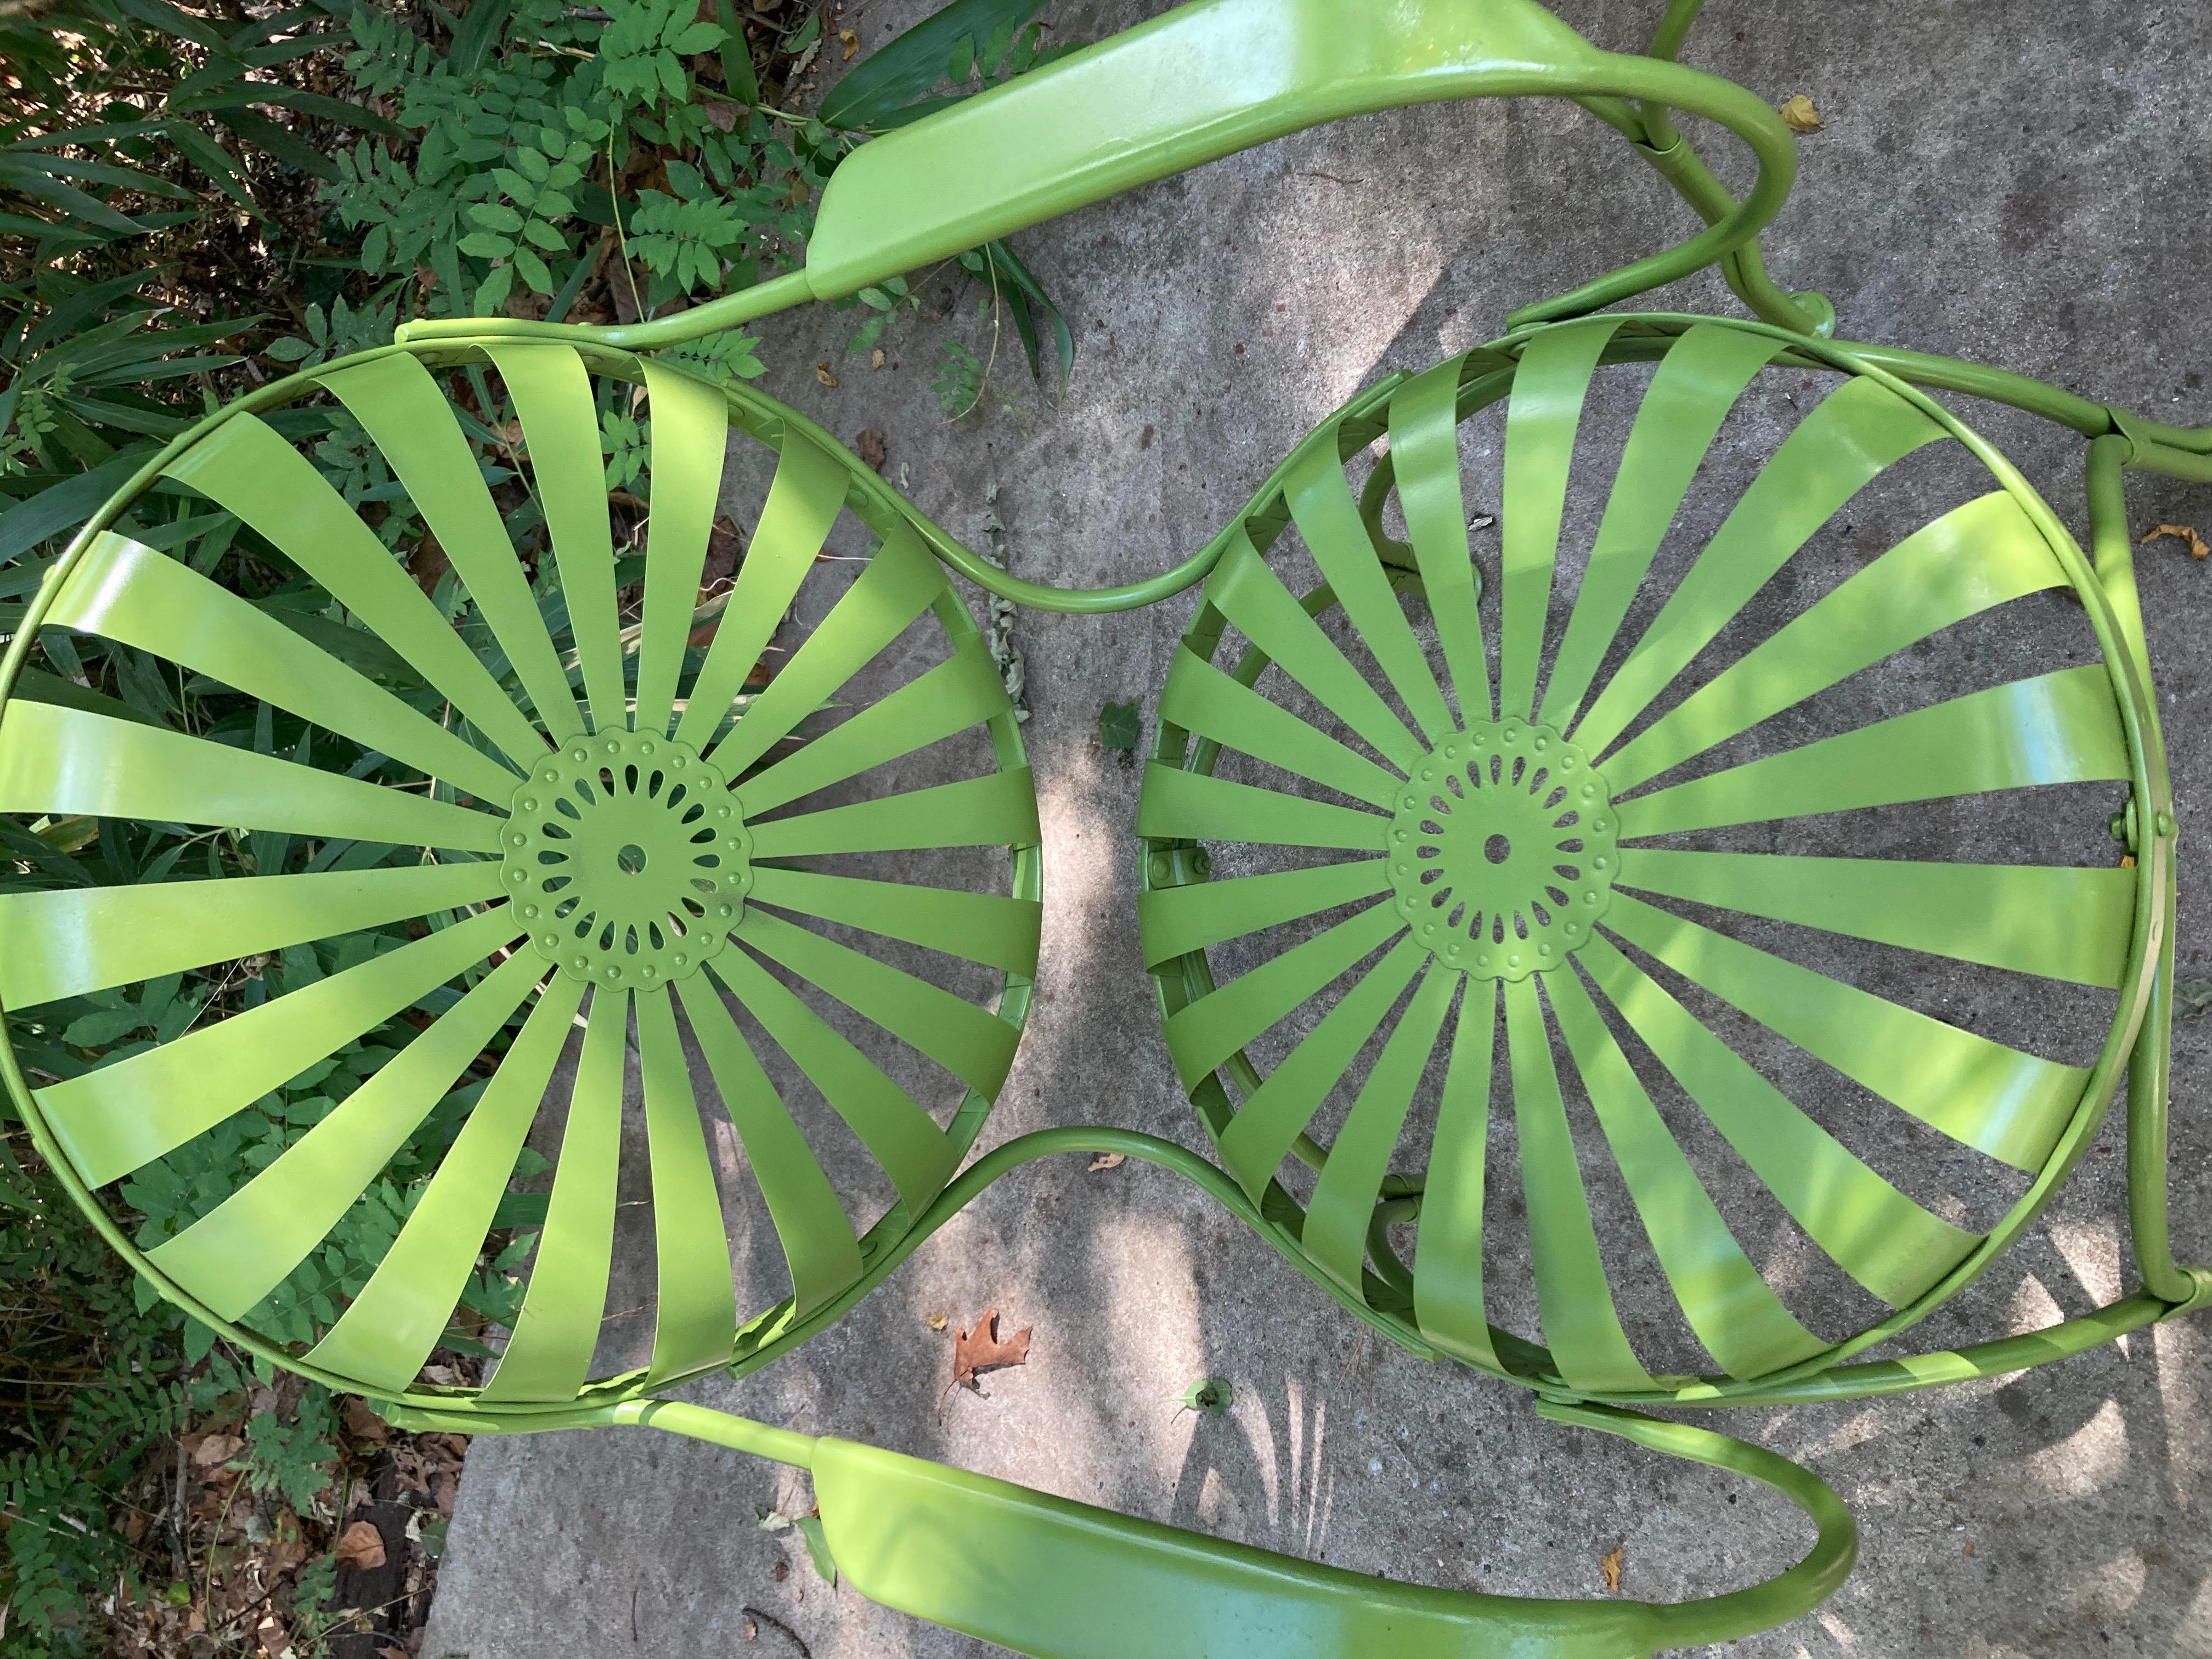 20th Century francois carre eden green garden chairs  For Sale